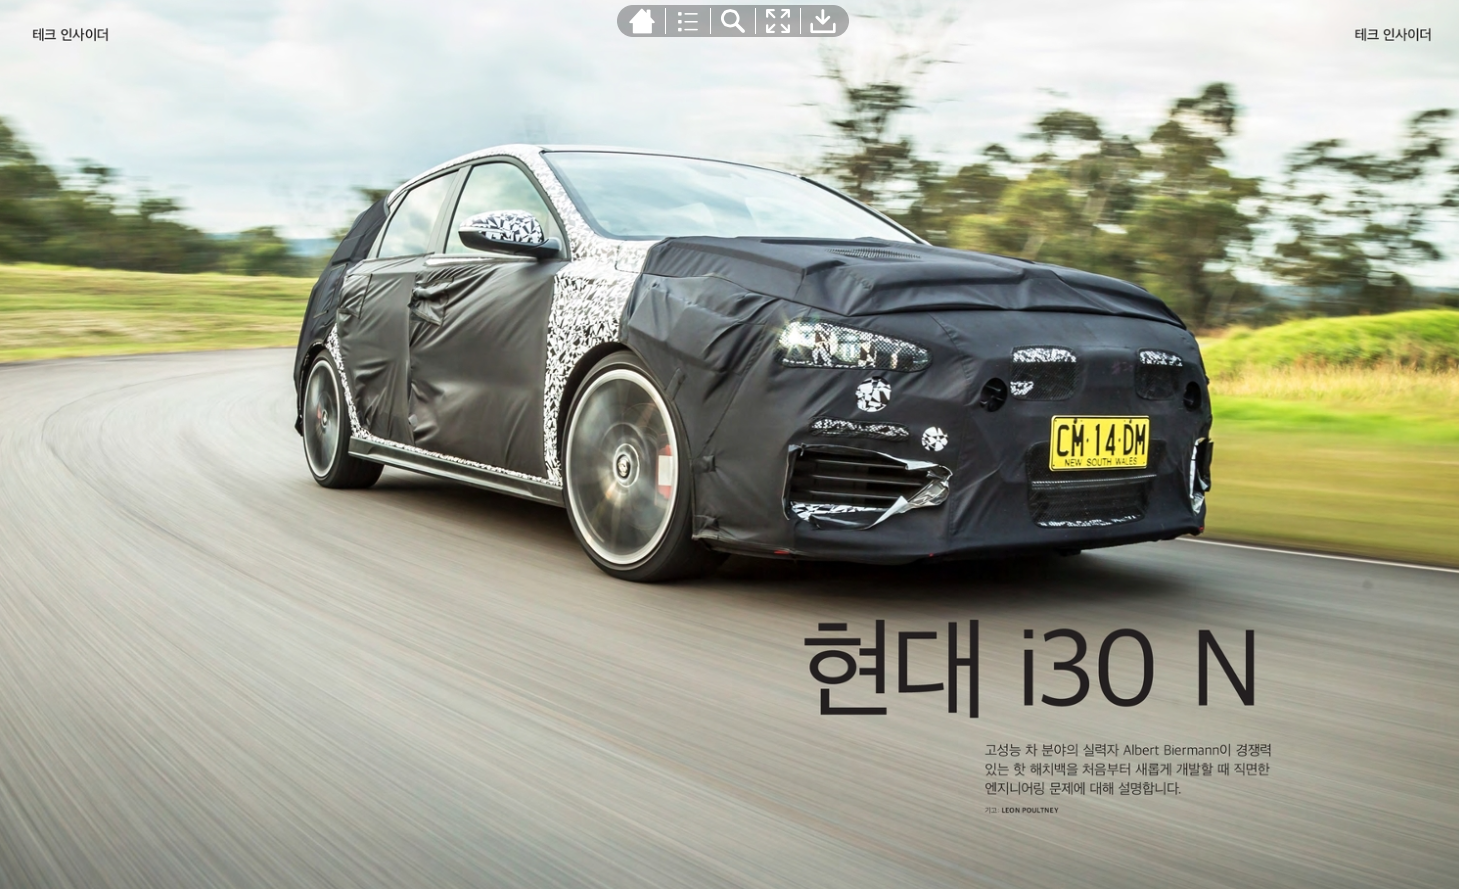 Development story for the Hyundai i30 N. Translated into numerous languages.